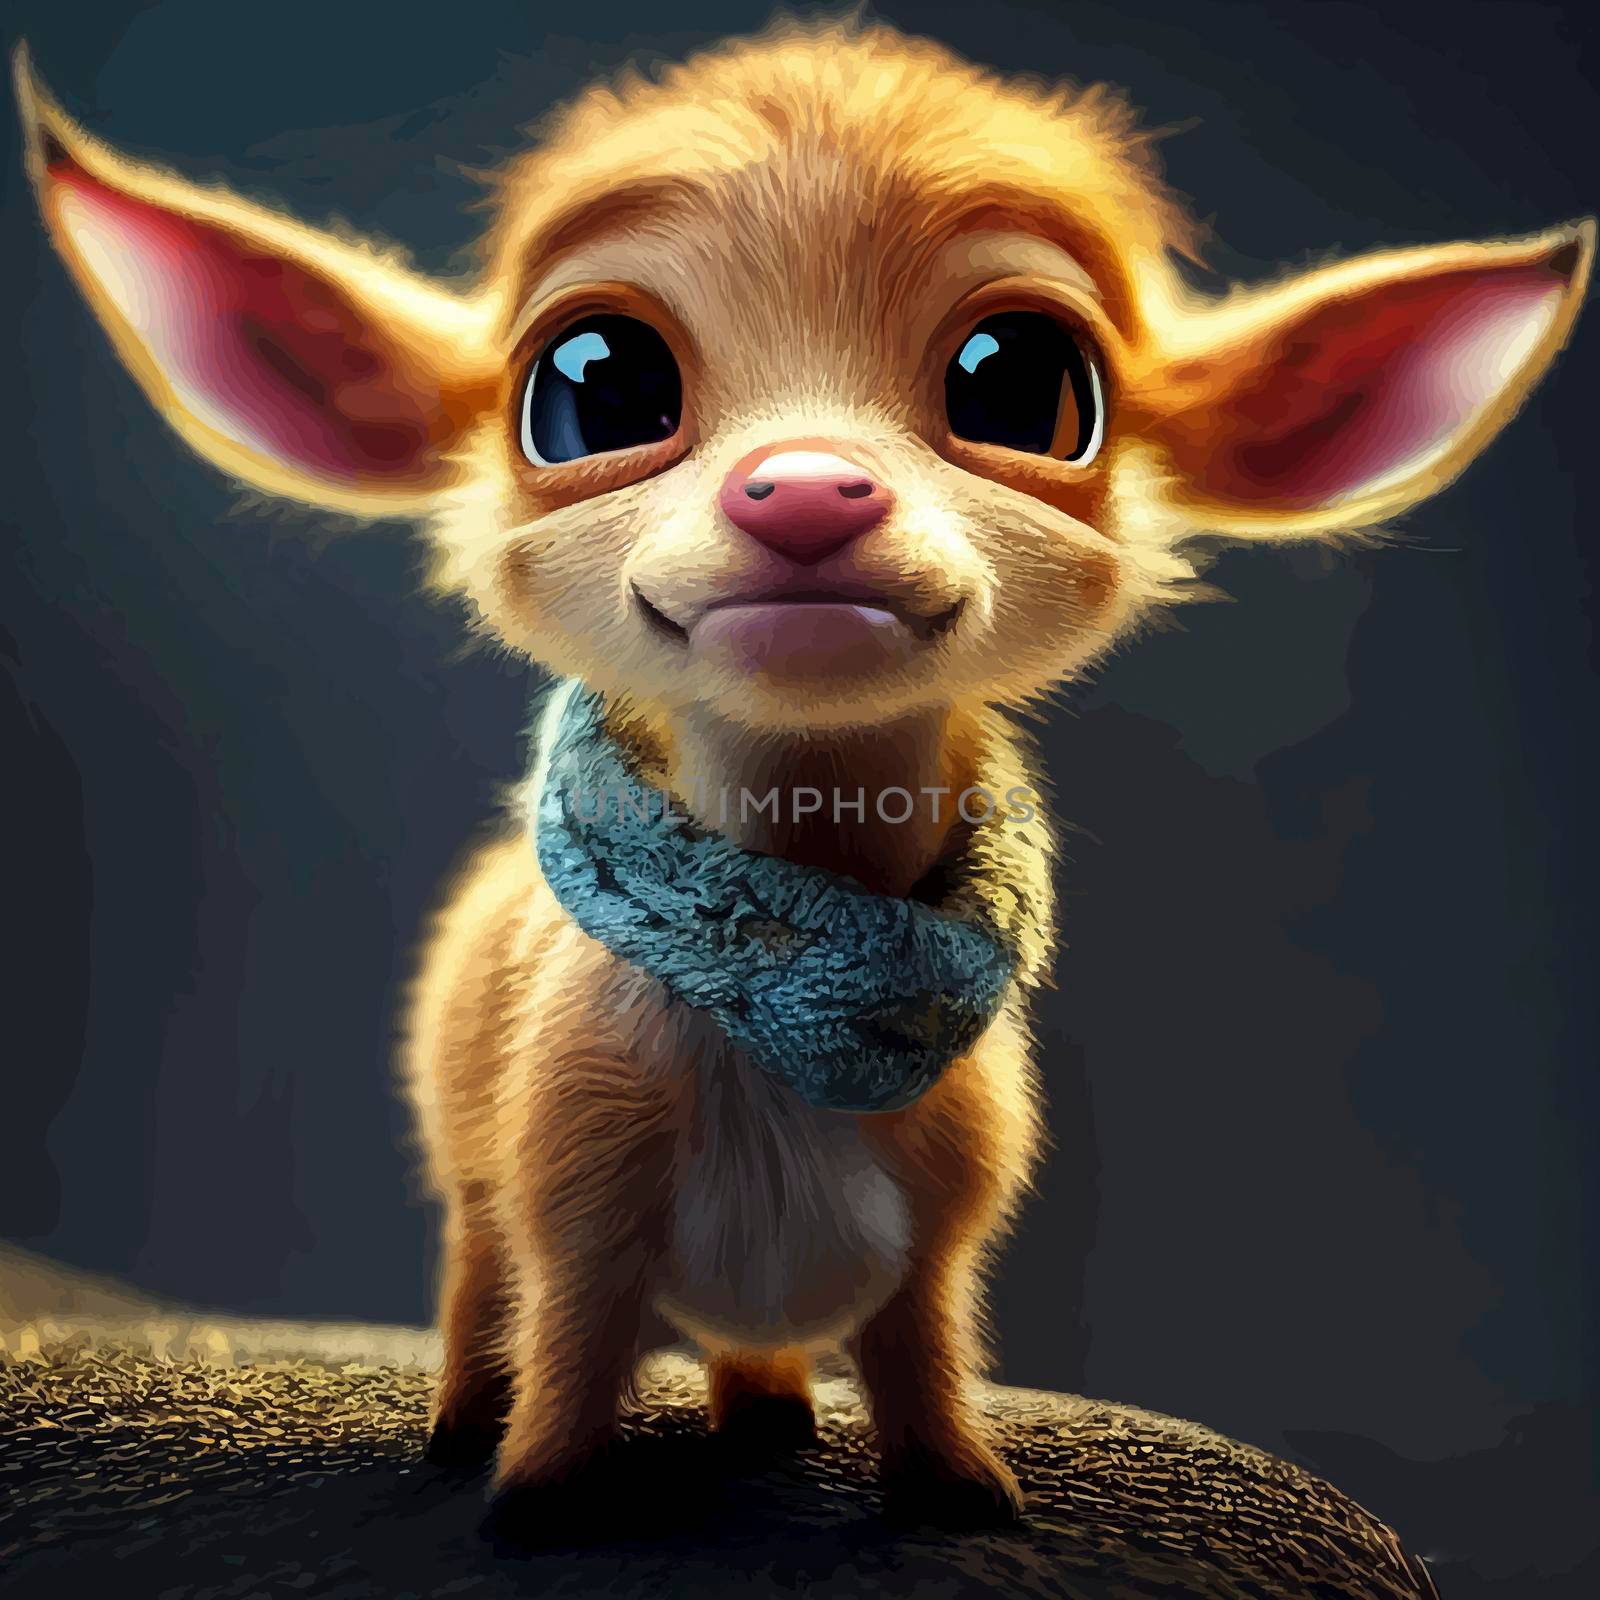 animated illustration of a cute scarf, animated baby scarf portrait.